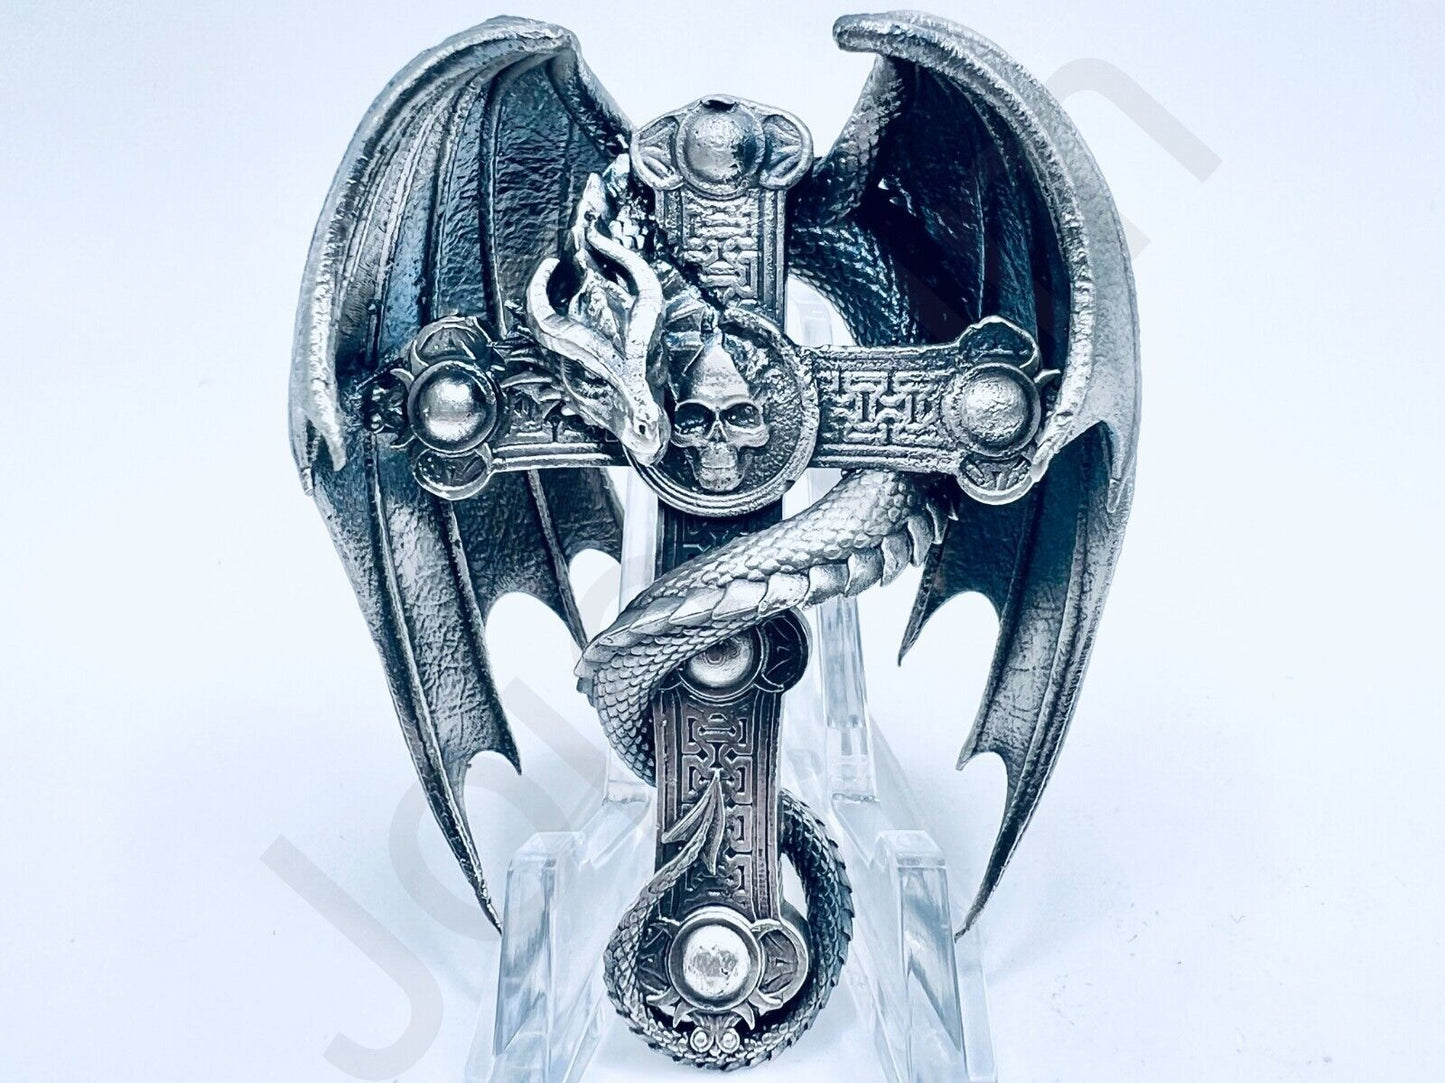 2.8 oz Hand Poured .999+ Fine Silver Bar Statue "Dragon Cross" By Gold Spartan